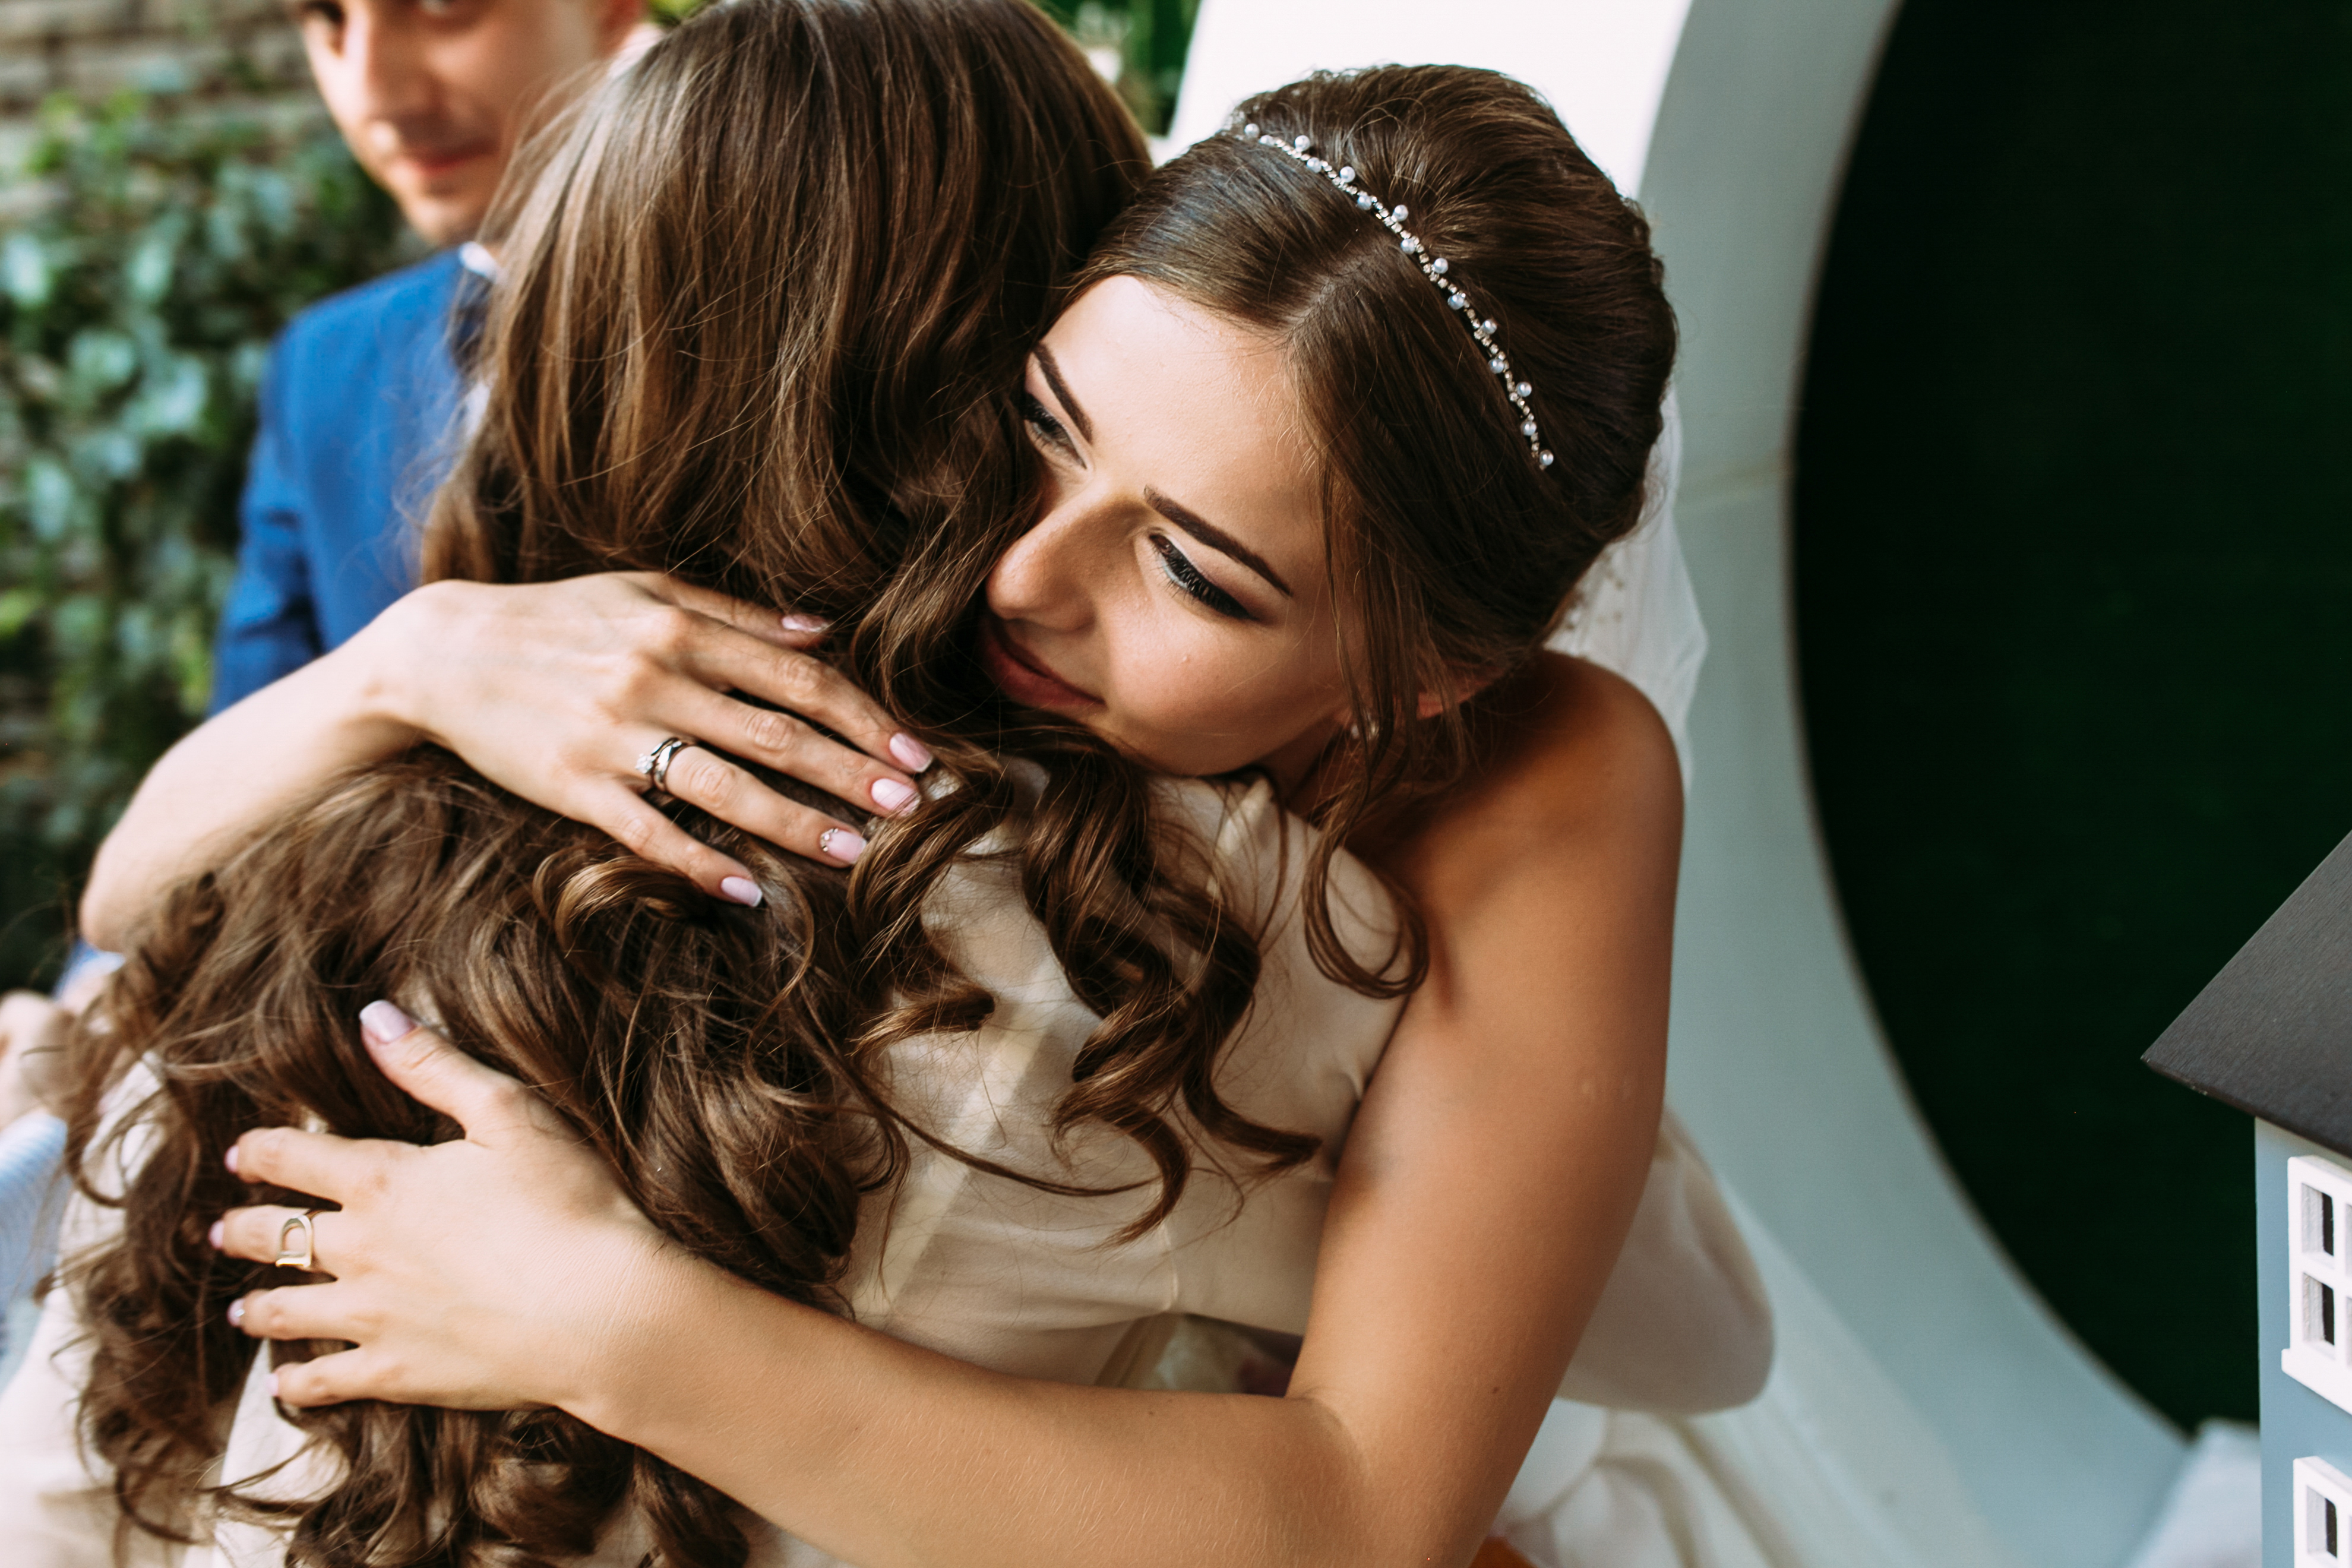 A bride embracing her mom at her wedding | Source: Shutterstock